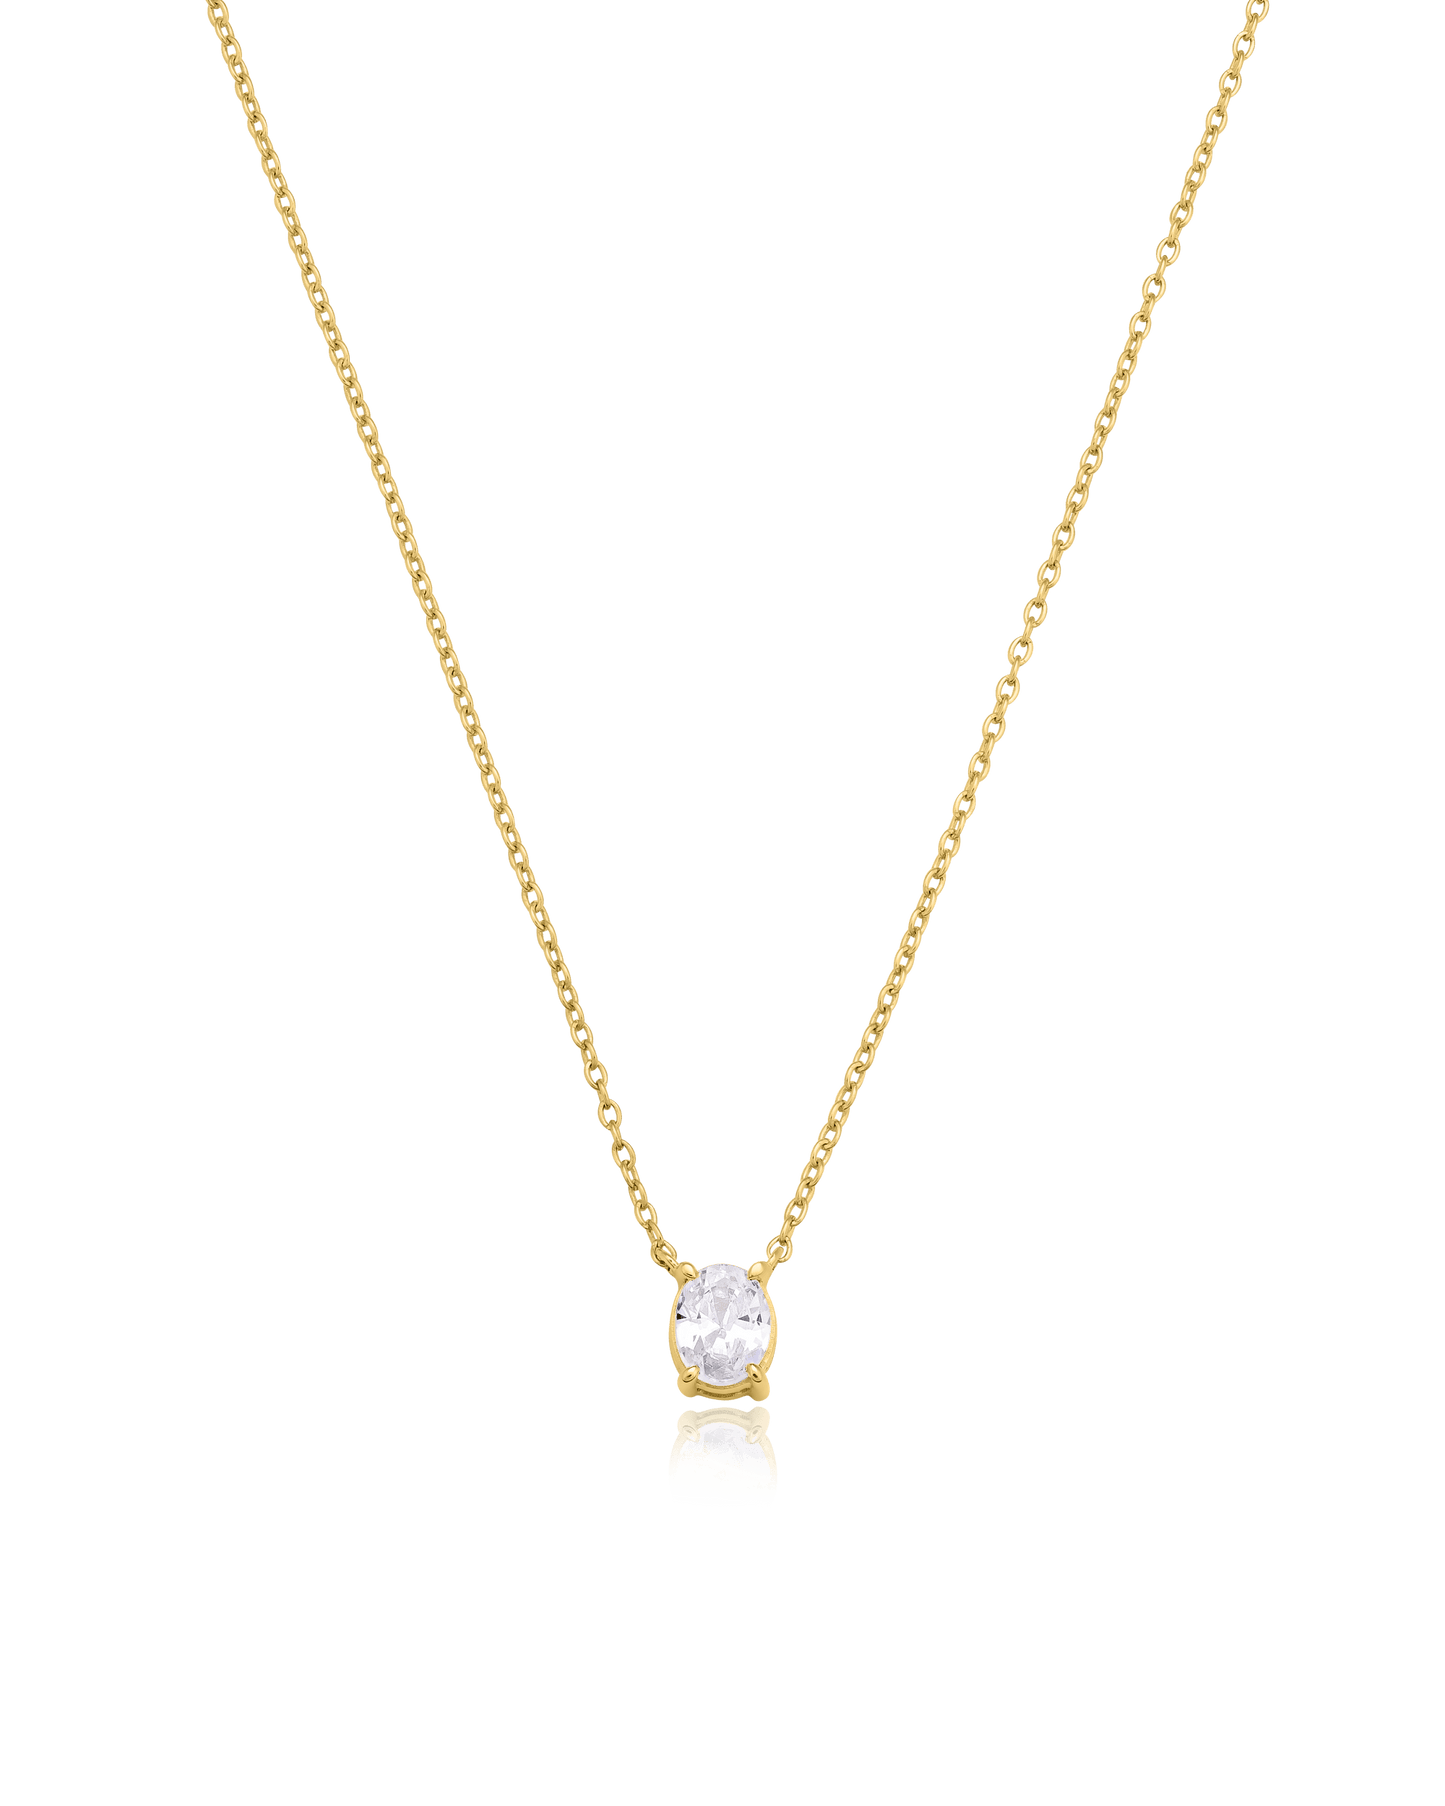 Oval Solitaire Diamond Necklace - 14K Rose Gold Necklaces magal-dev 